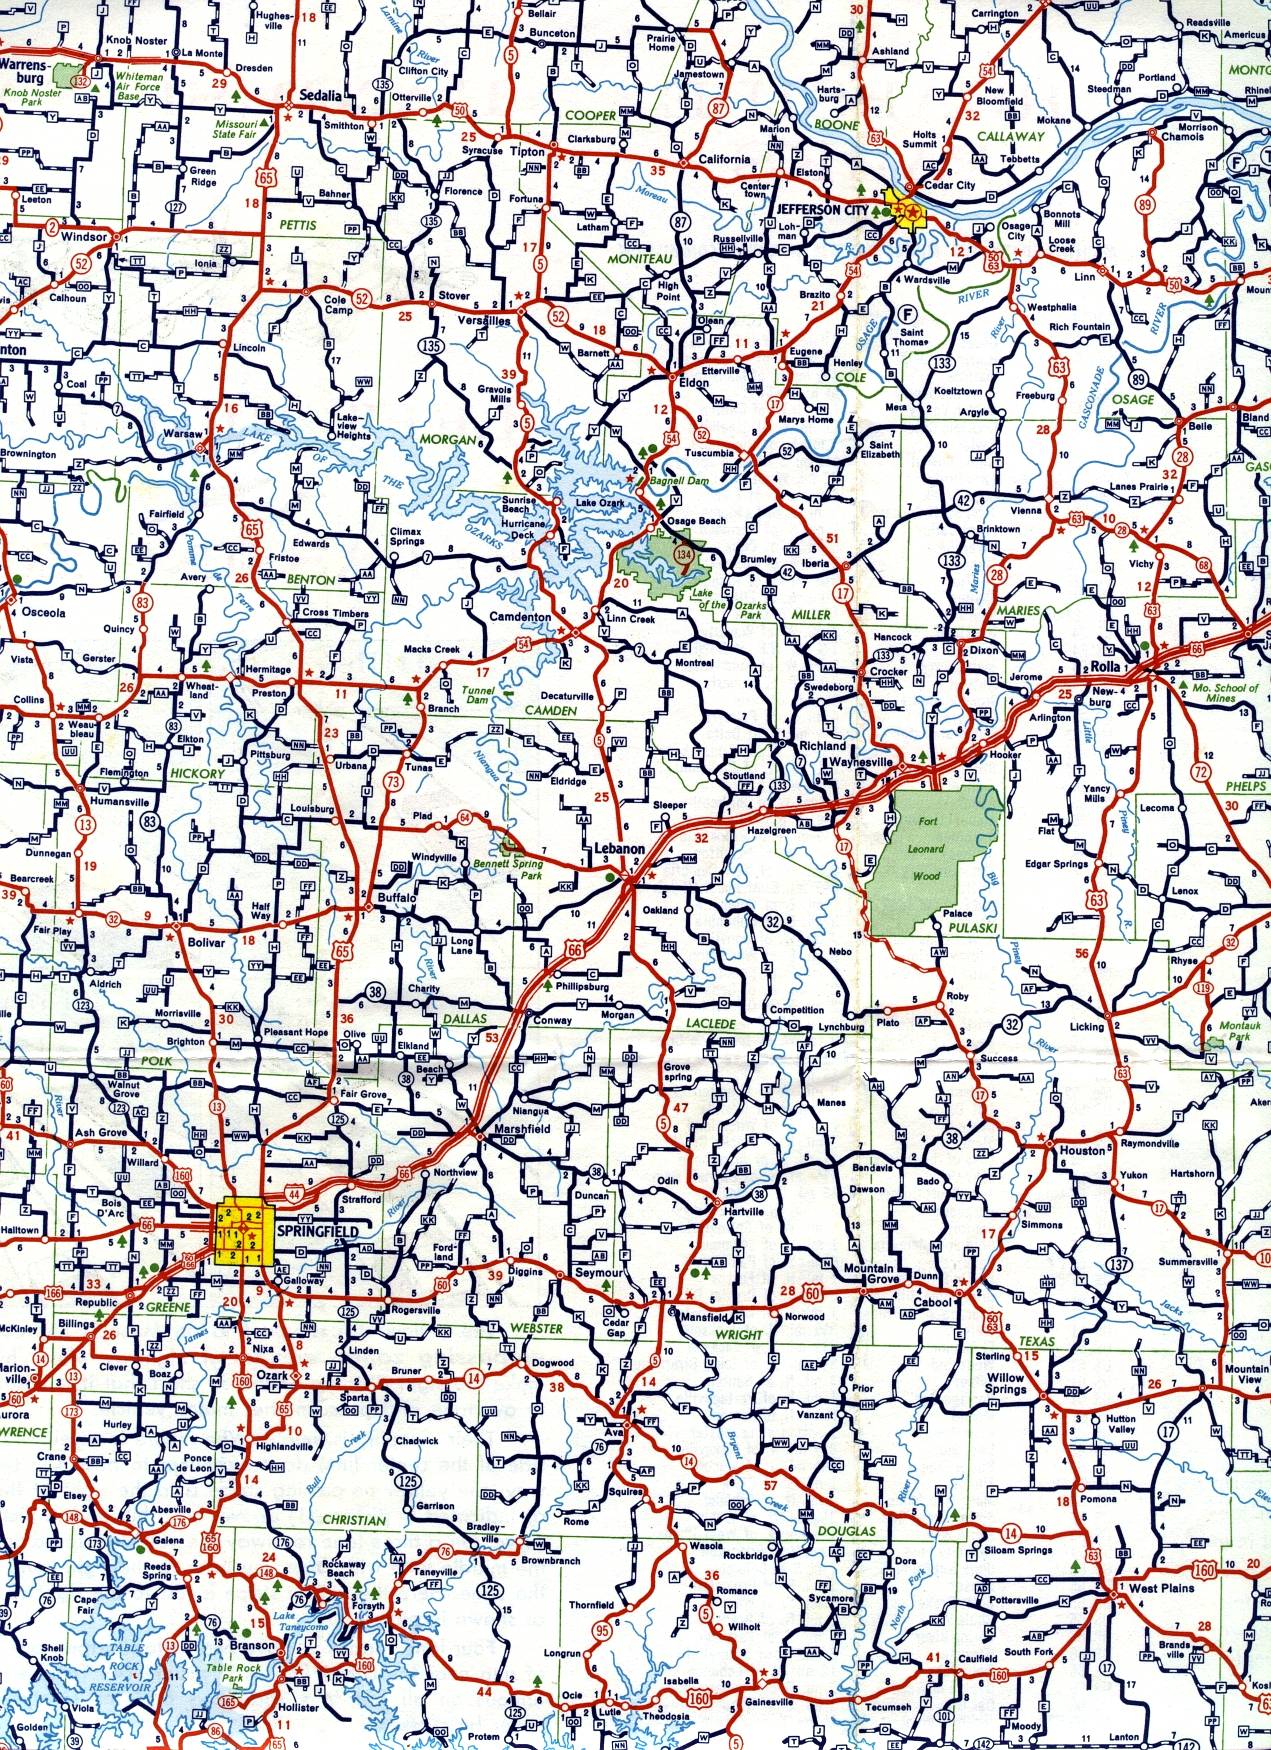 South-central section of Missouri from 1959 official highway map